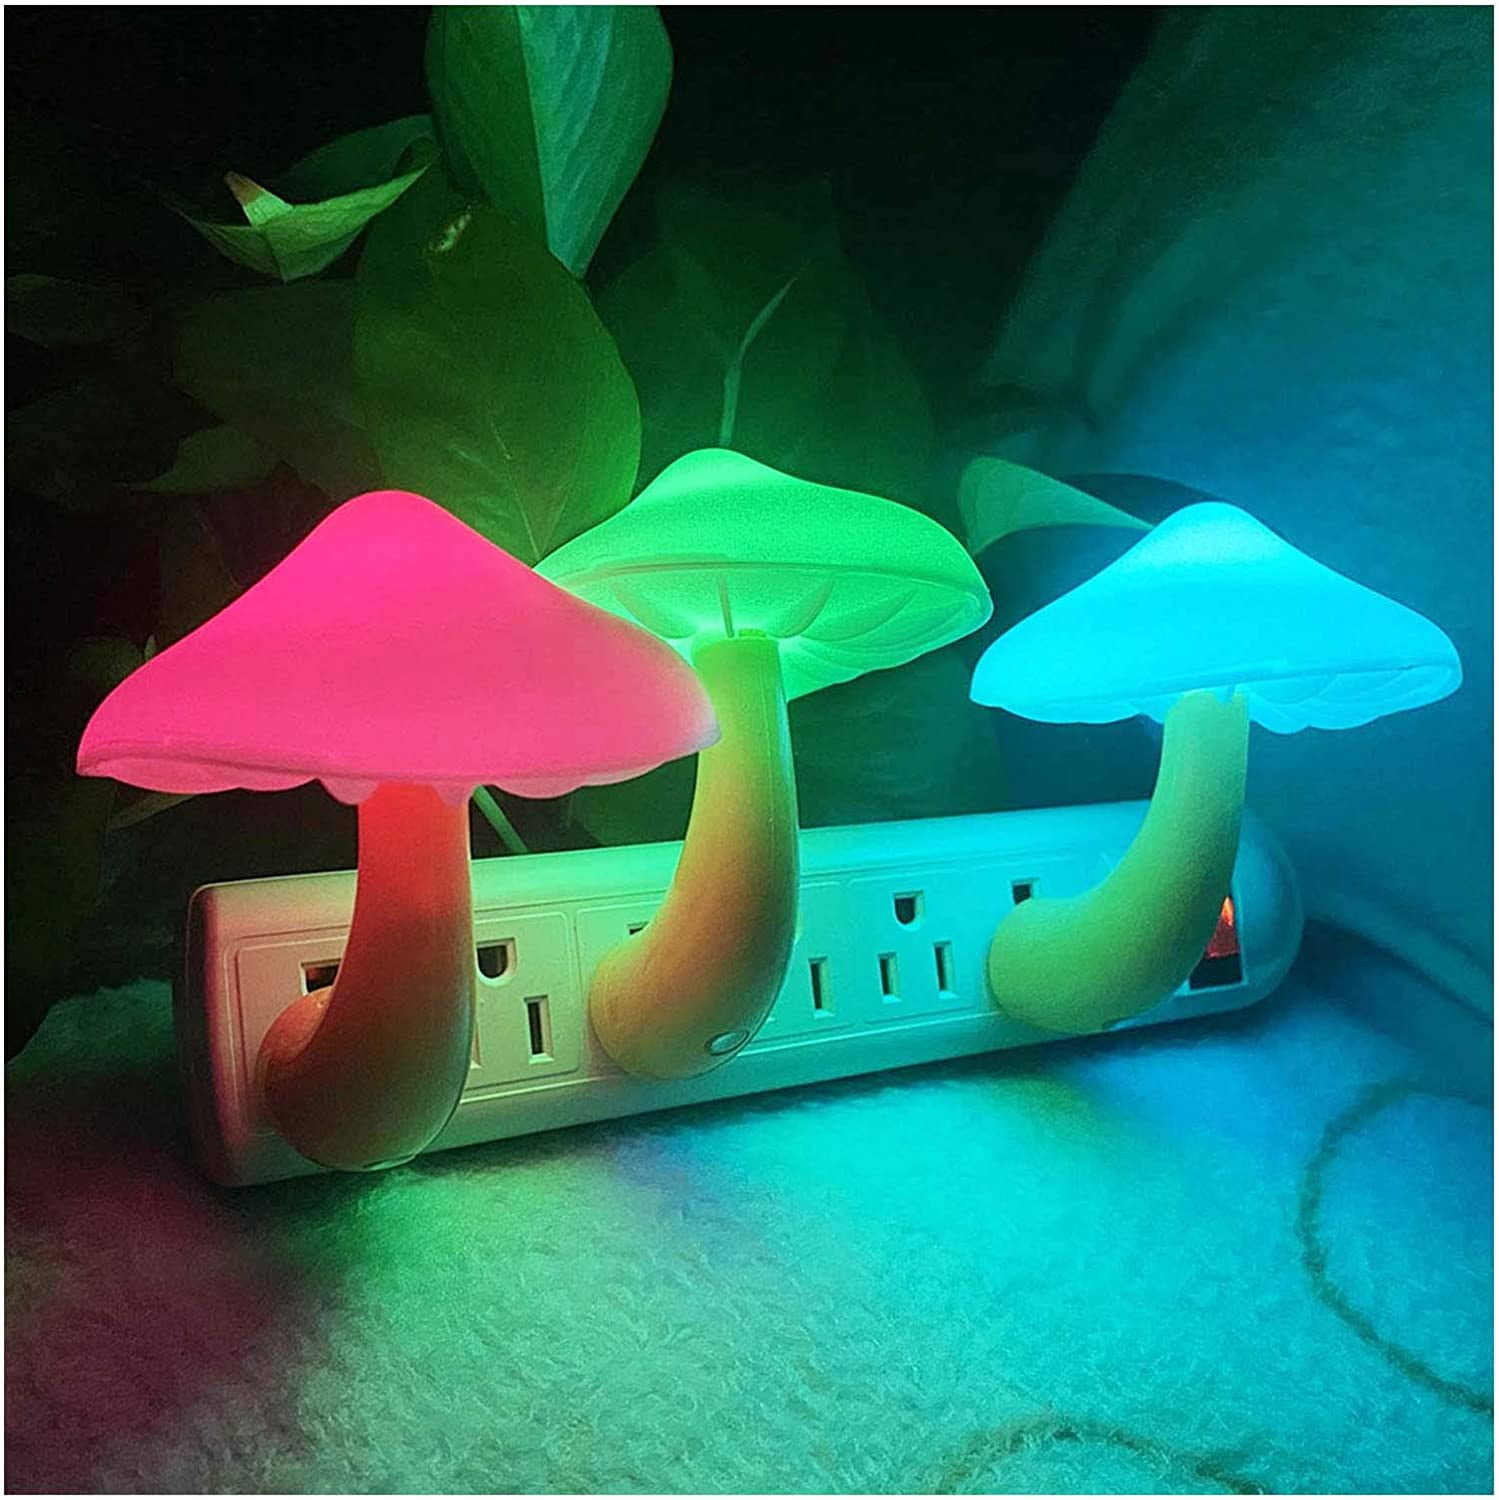 Details about   LED Night Light Plug-in-Wall Lamp Kids Bedroom Mushroom Lamp Home Decor Gift 